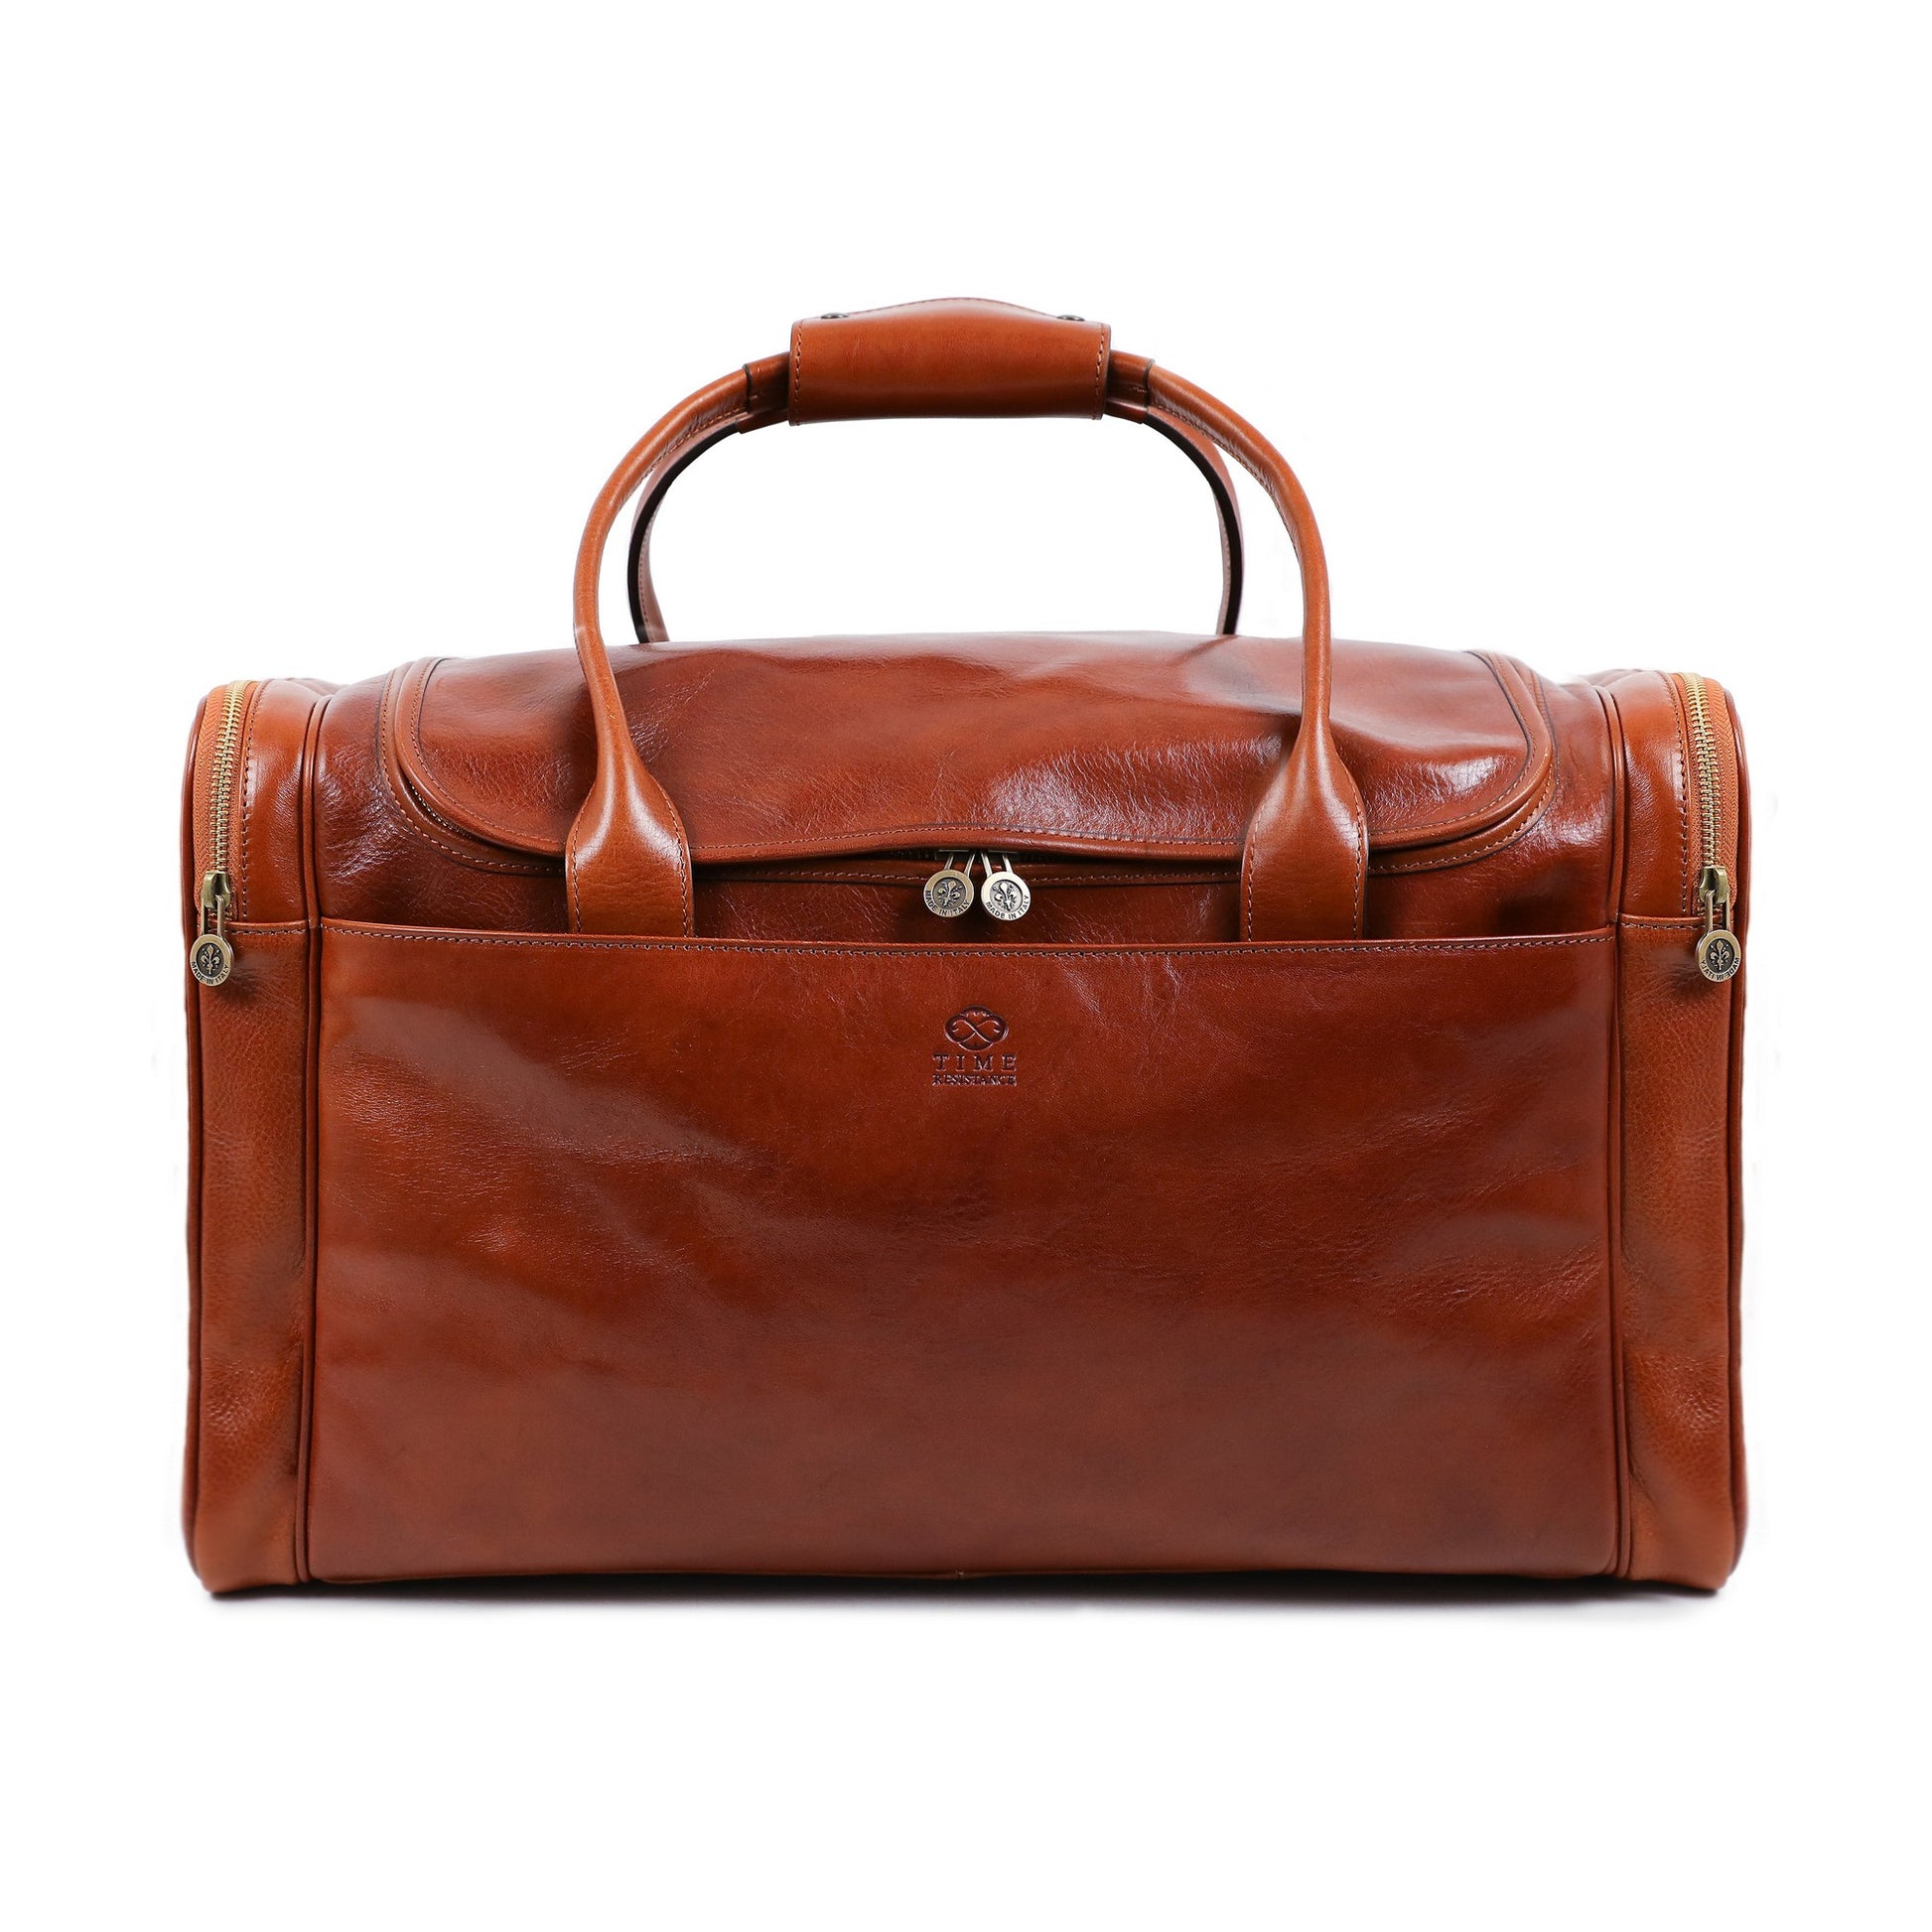 Large Italian Leather Duffel Bag - The Hitchhikers Guide to the Galaxy Duffel Bag Time Resistance   